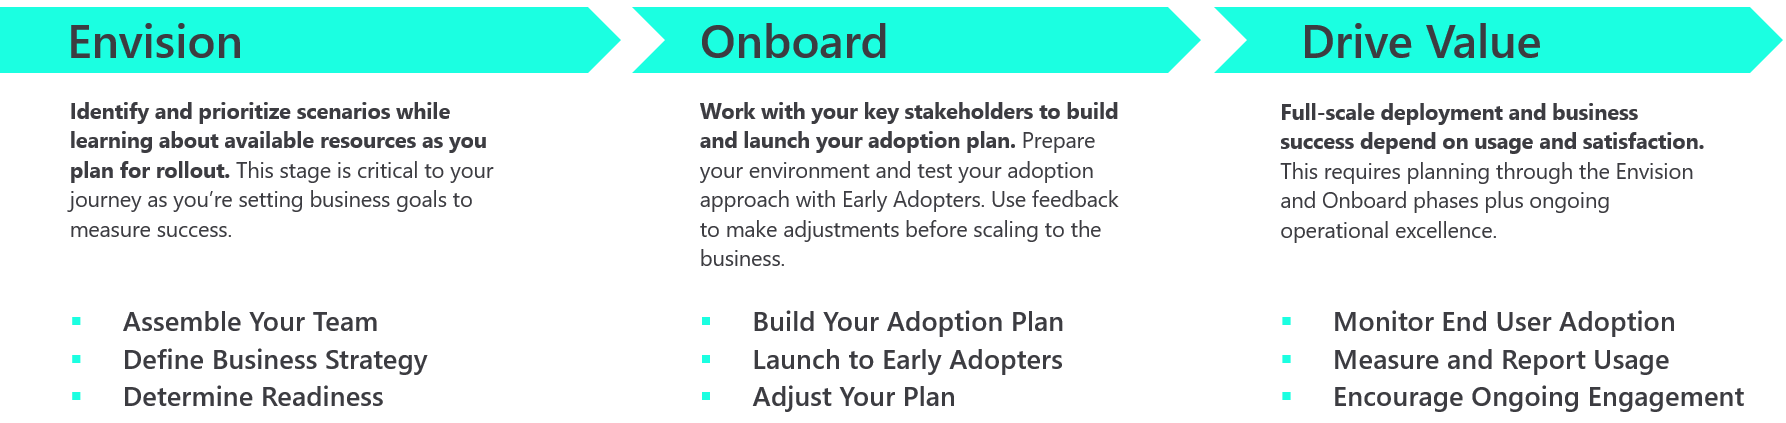 Three phases of an adoption plan: envision, onboard, drive value.